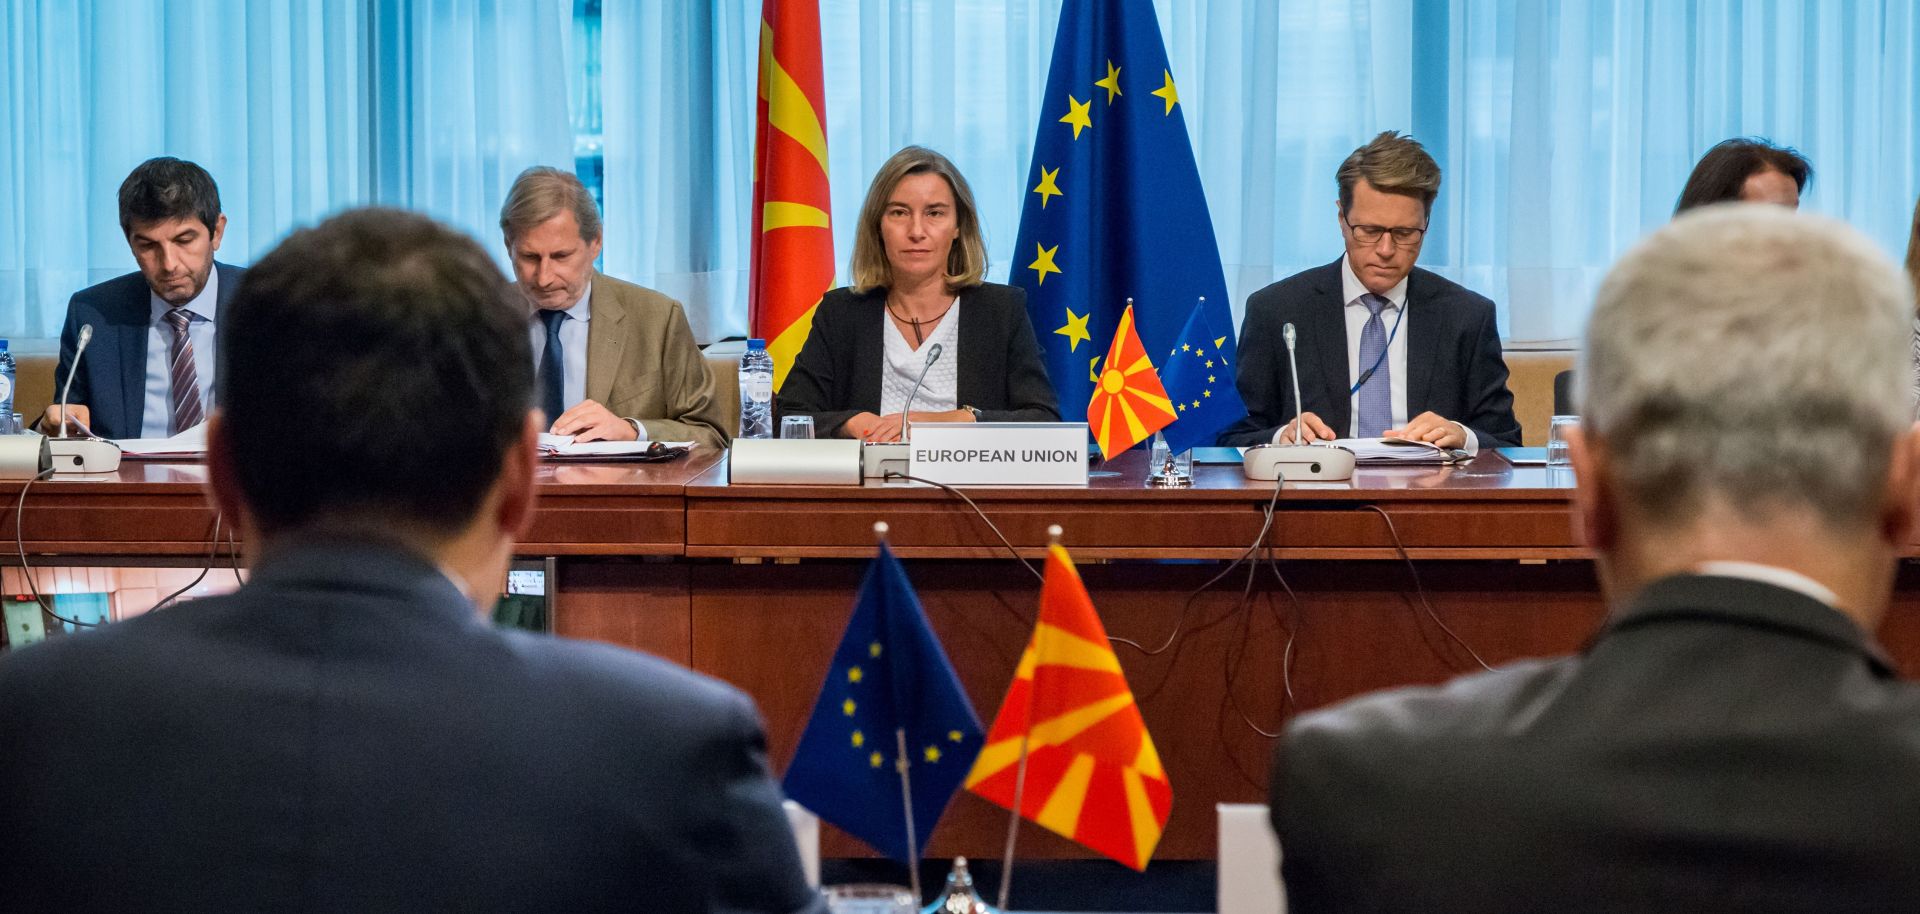 Macedonia is improving relations with its neighbors so it can join the European Union and the North Atlantic Treaty Organization.